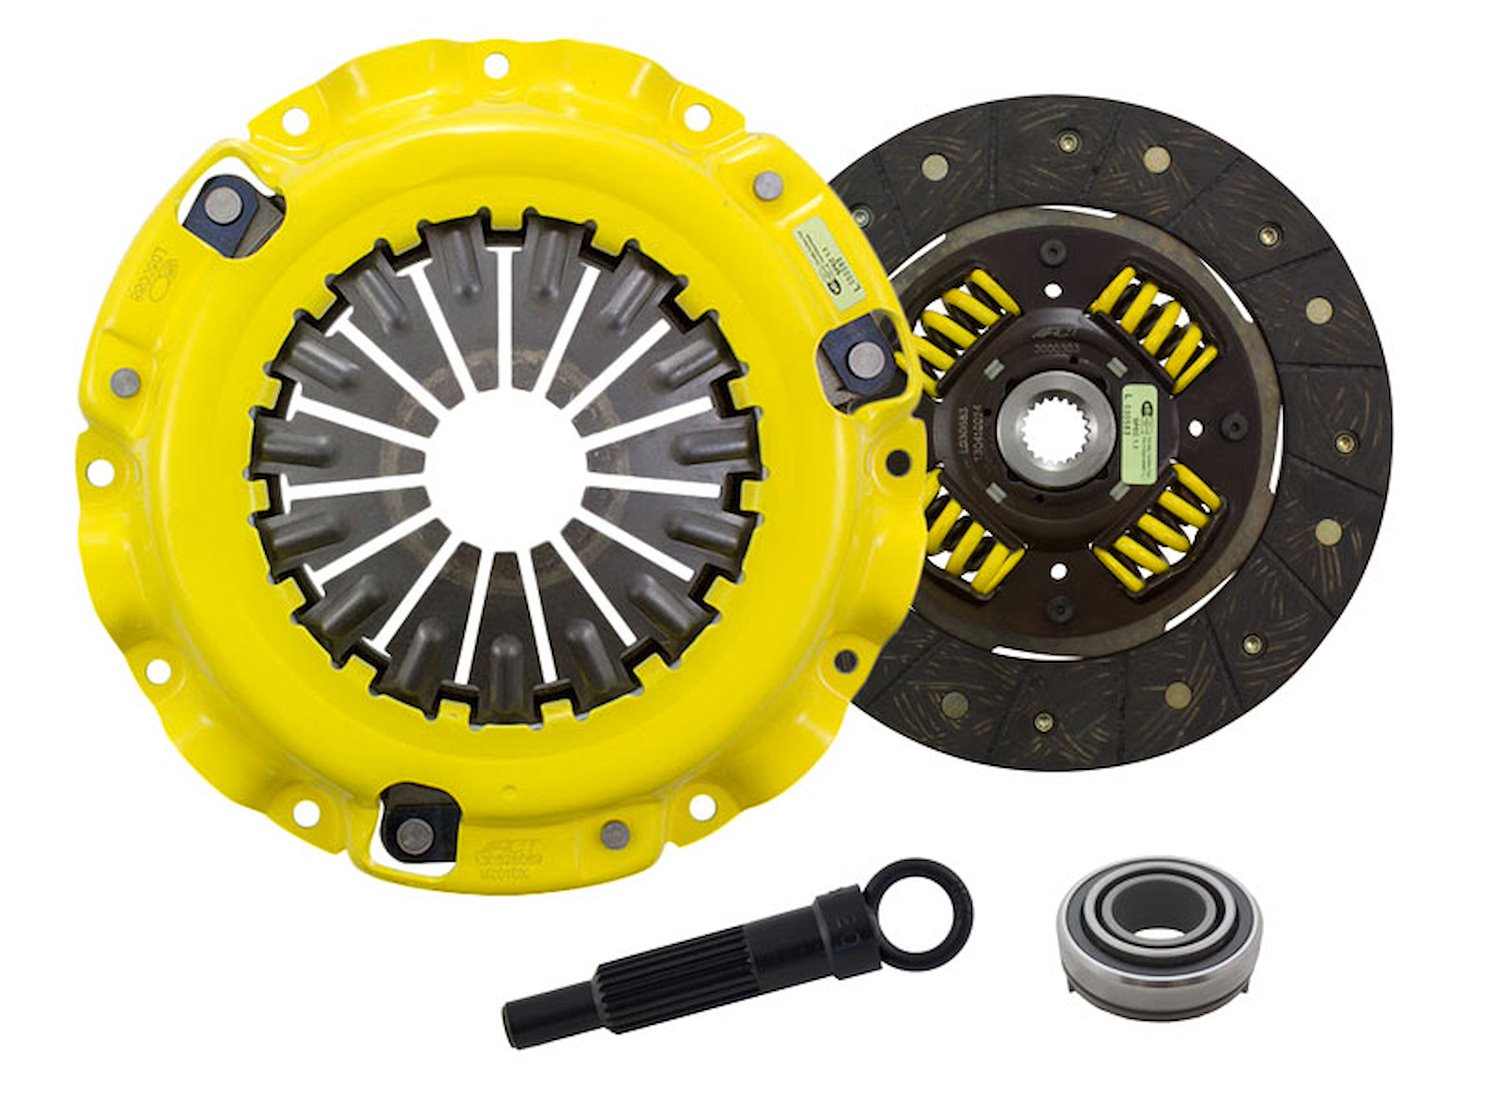 XT/Performance Street Sprung Transmission Clutch Kit Fits Select Chrysler/Dodge/Eagle/Mitsubishi/Plymouth